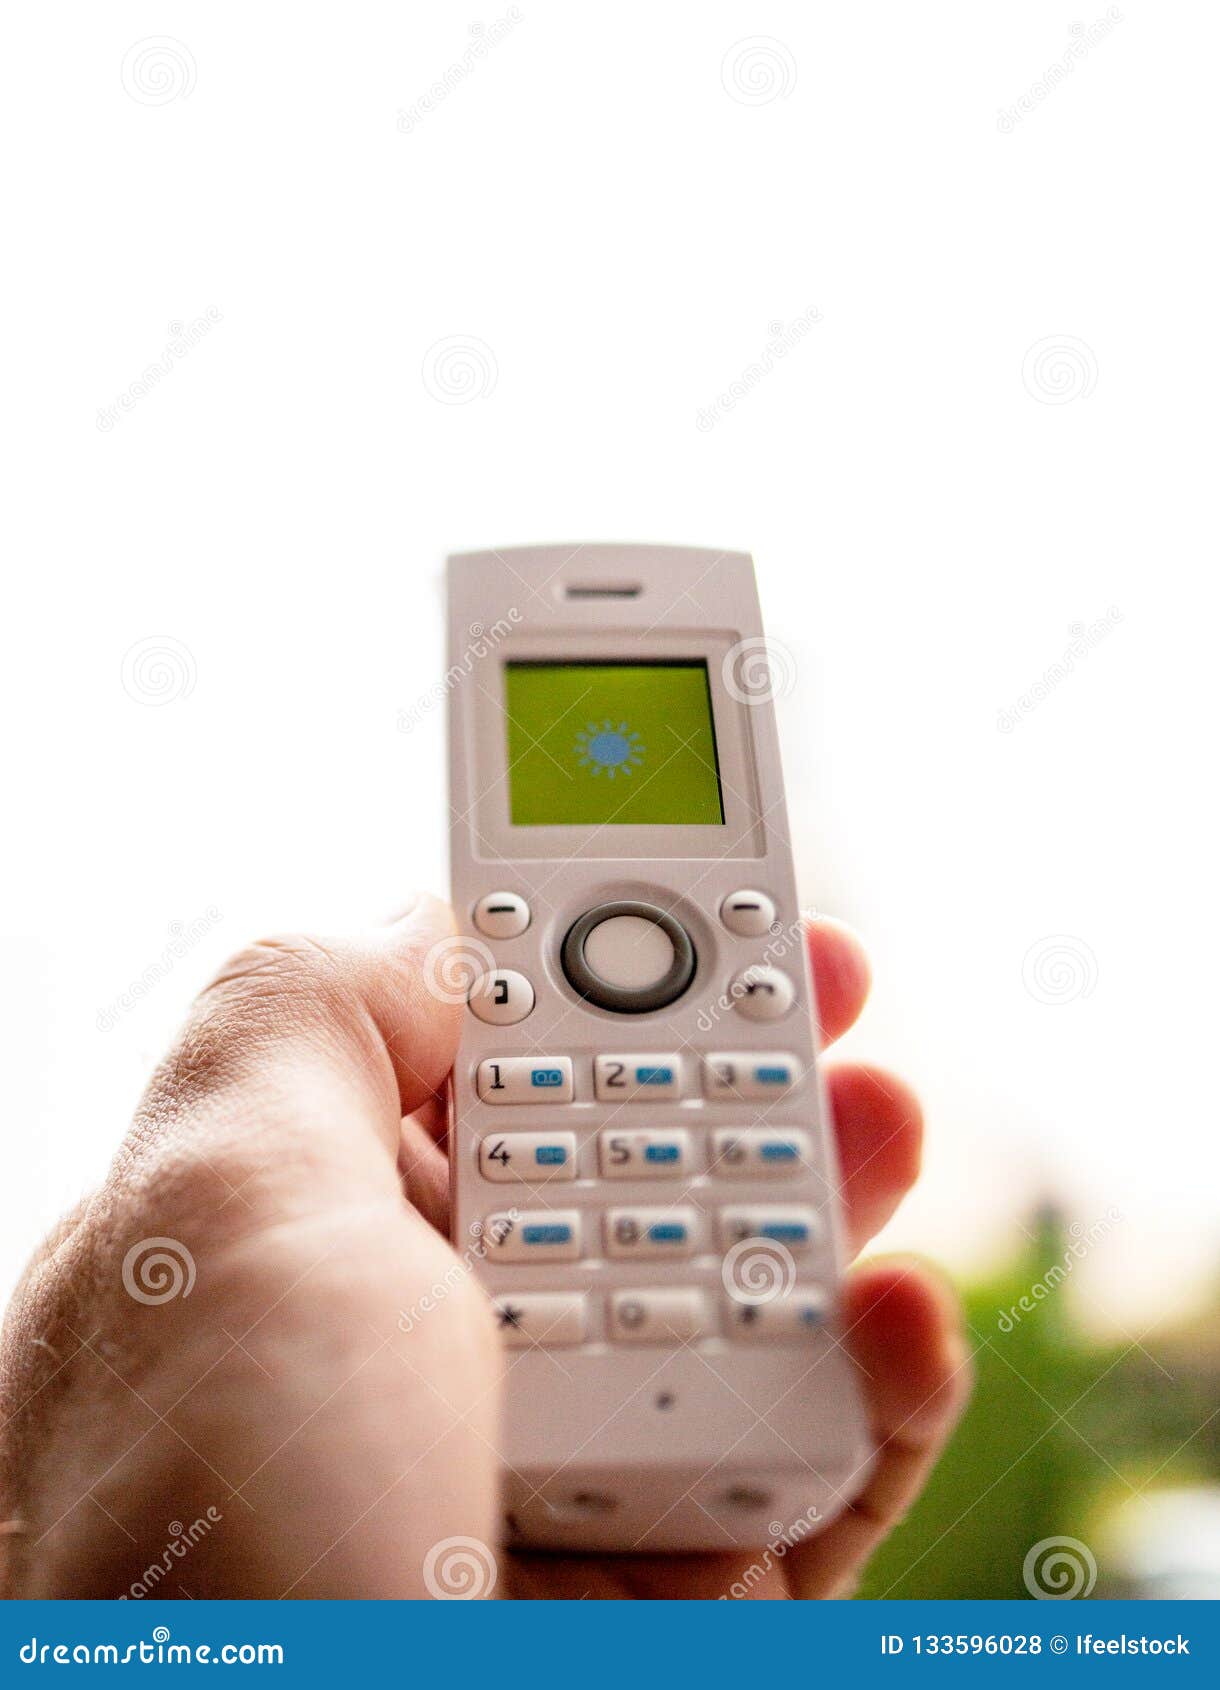 man hand holding cordless phone calling home office